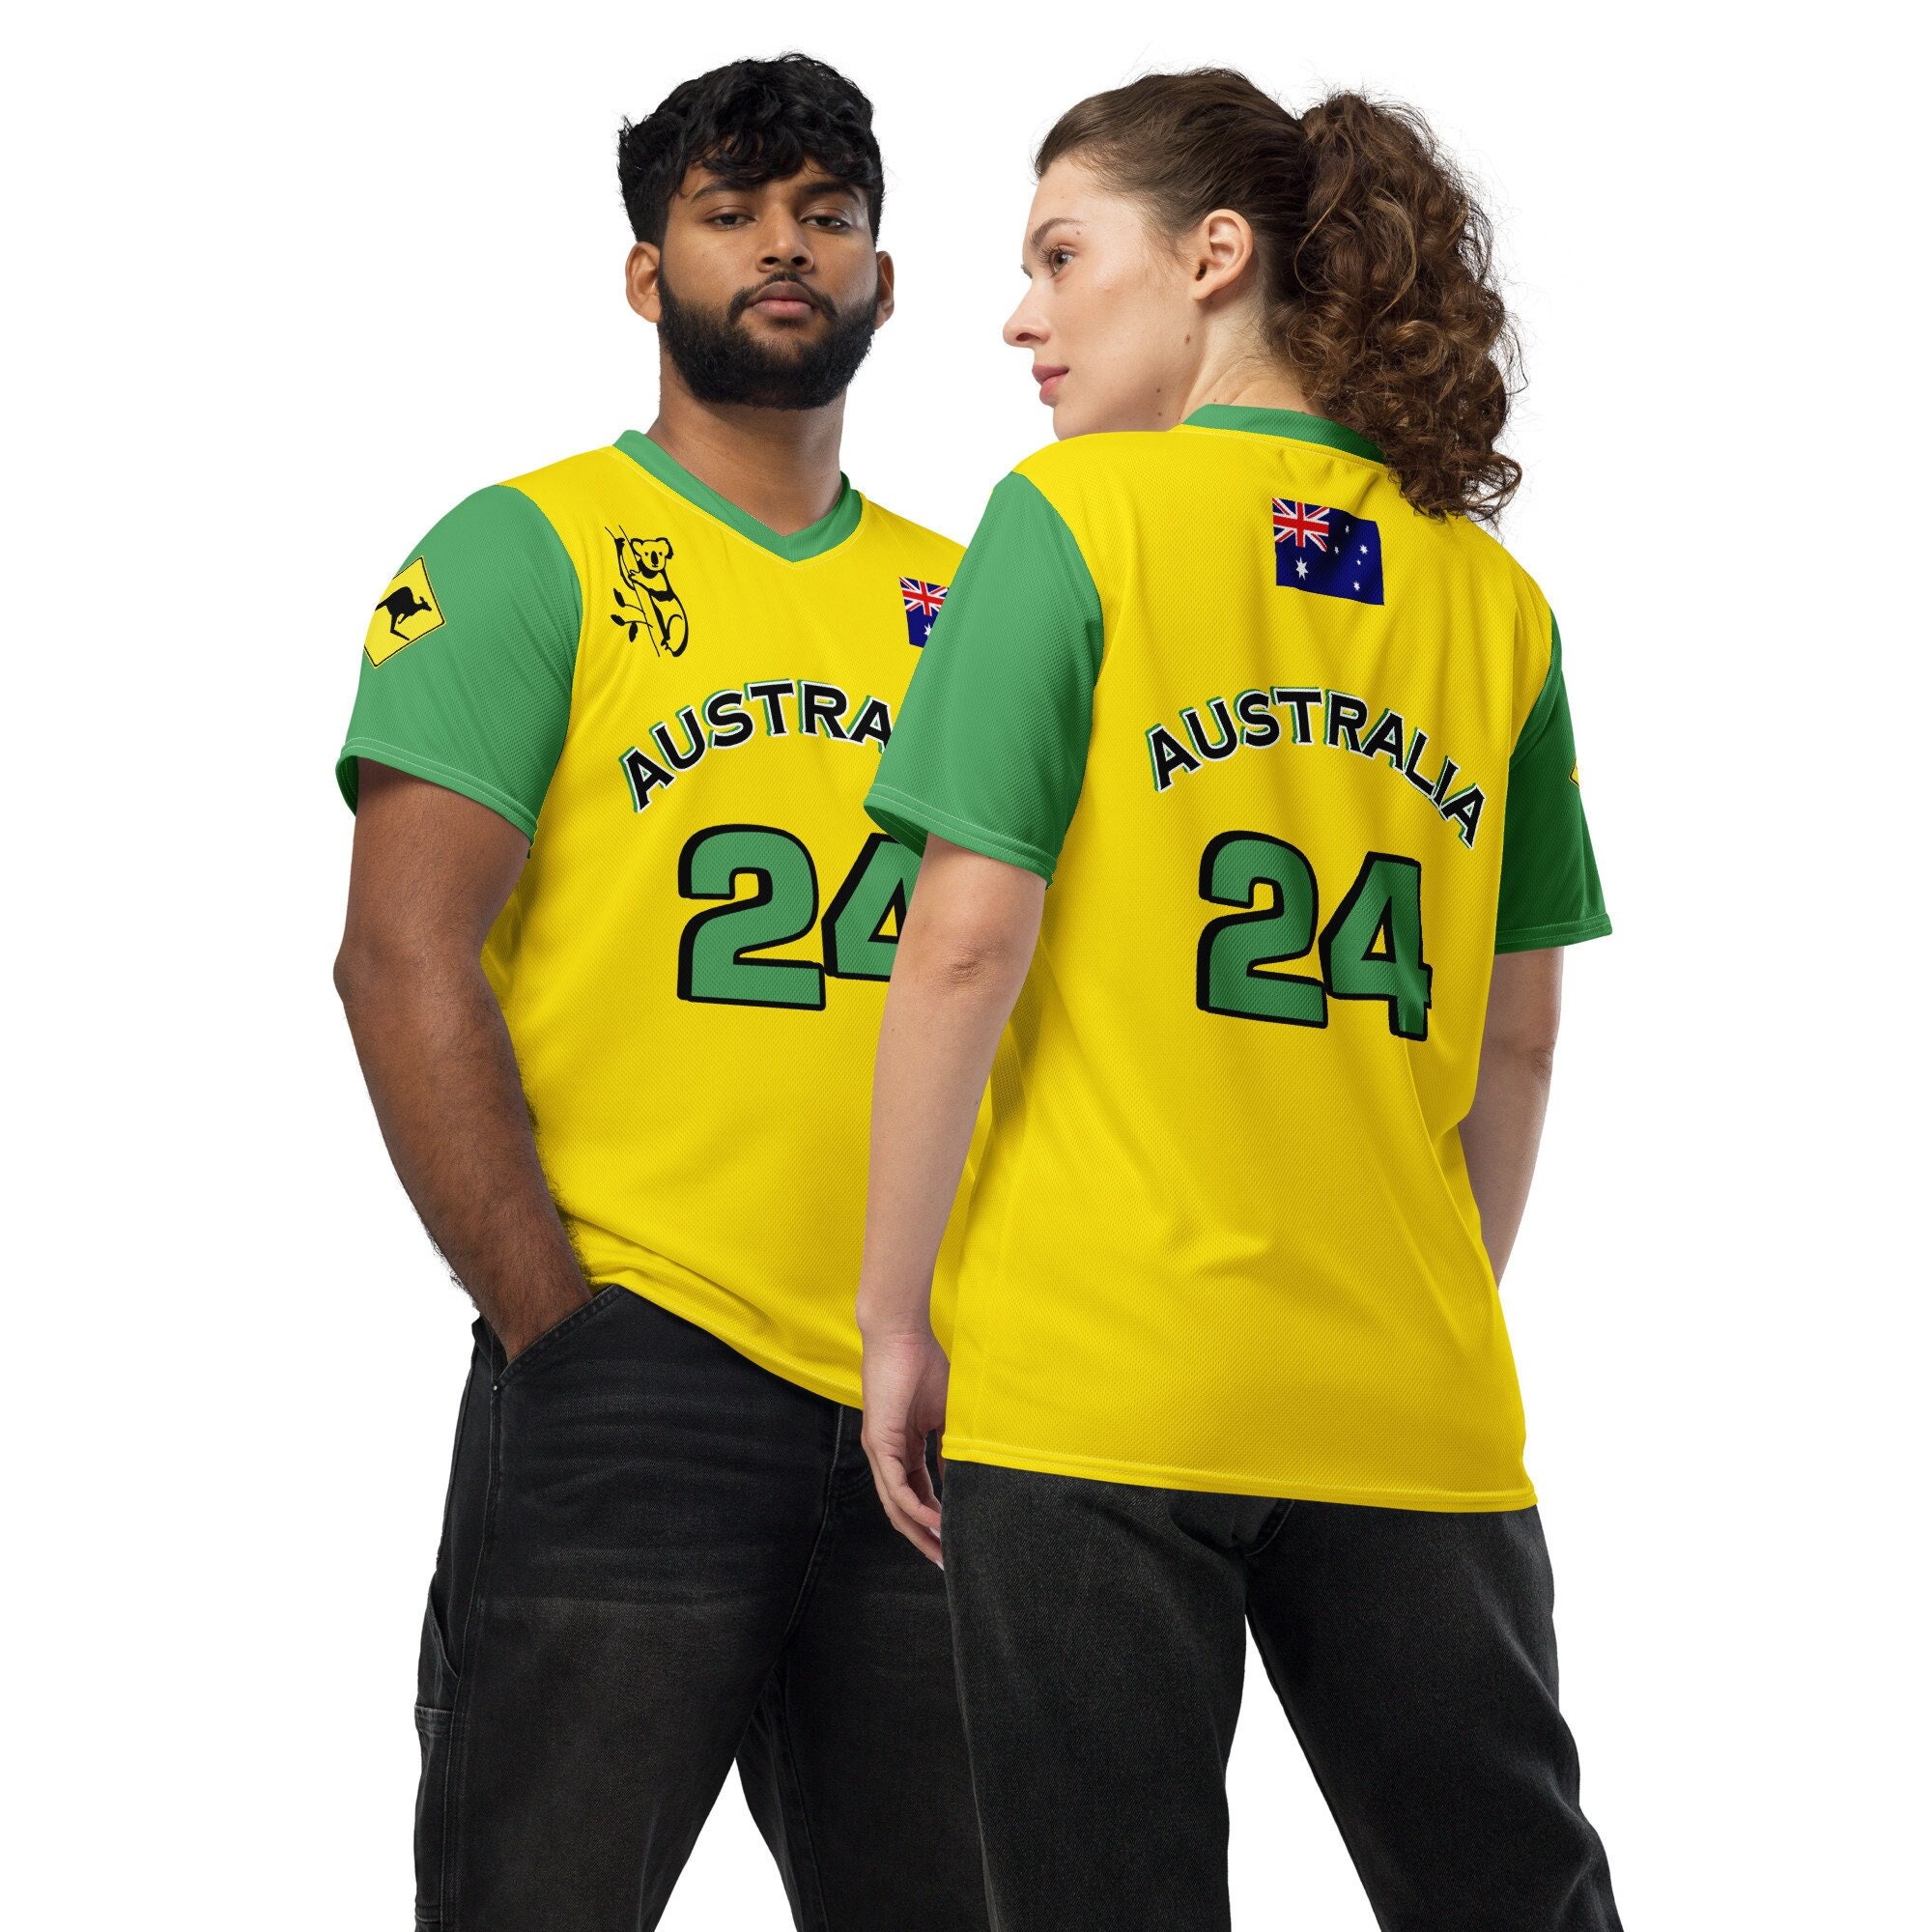 Australian men's team to wear Indigenous jersey in T20s against India |  Cricket News - Times of India